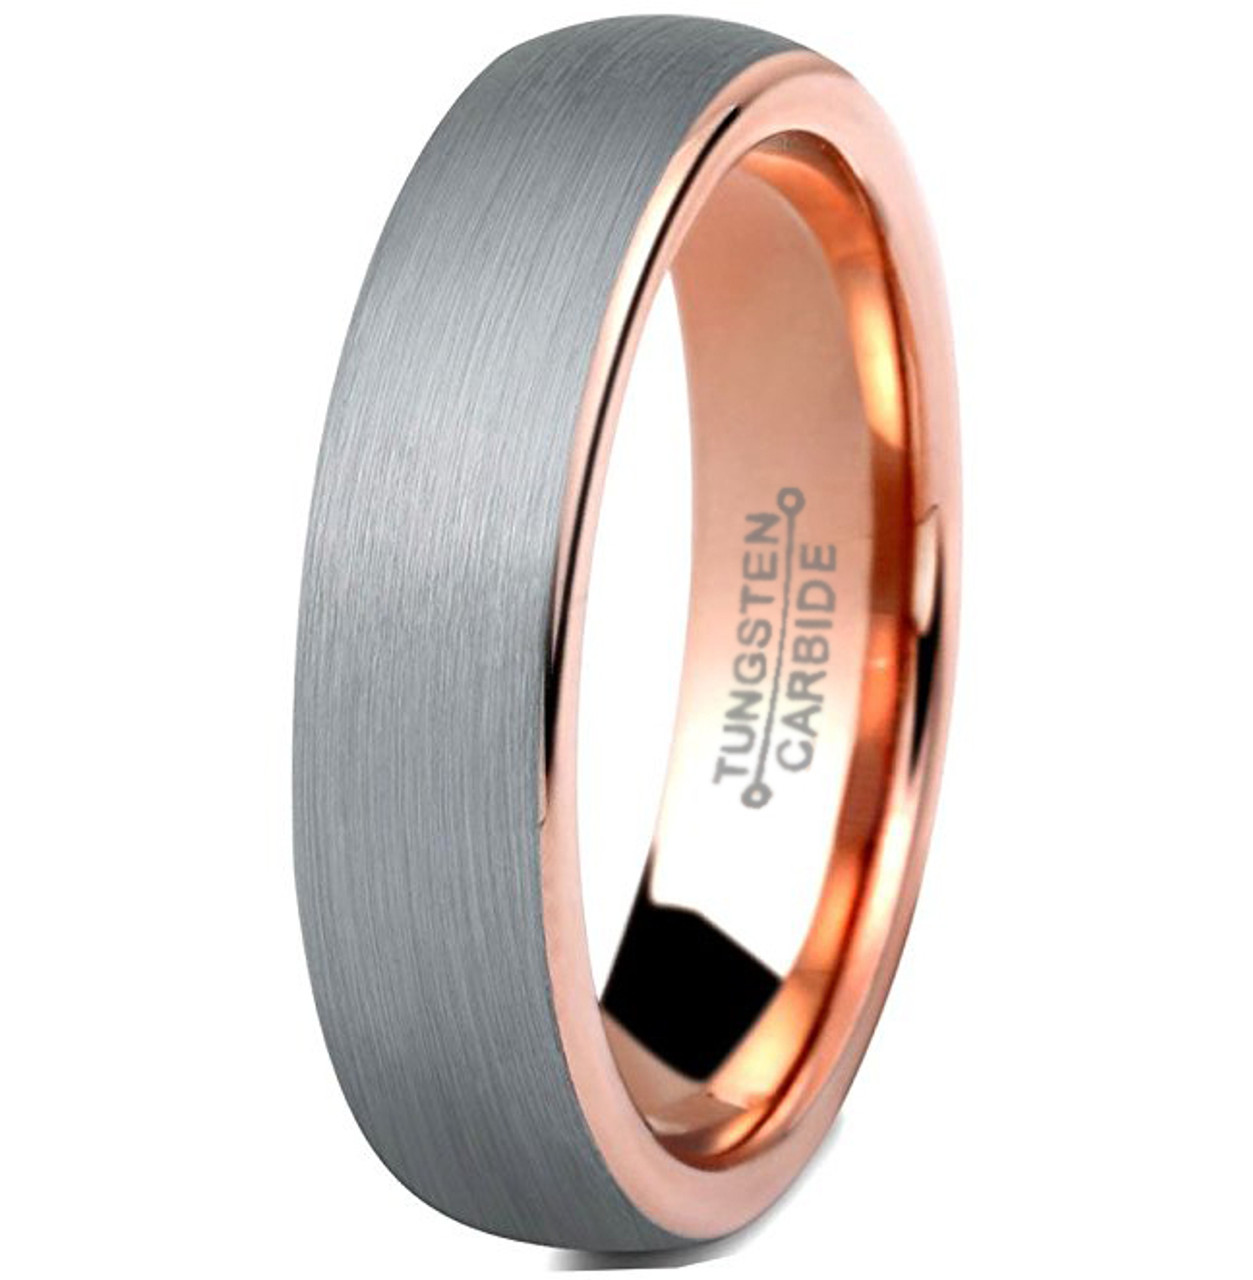 5mm - Women's Tungsten Wedding Band Ring (5mm). Comfort Fit Gray and Rose Gold Round Domed Brushed. Unisex Wedding Bands